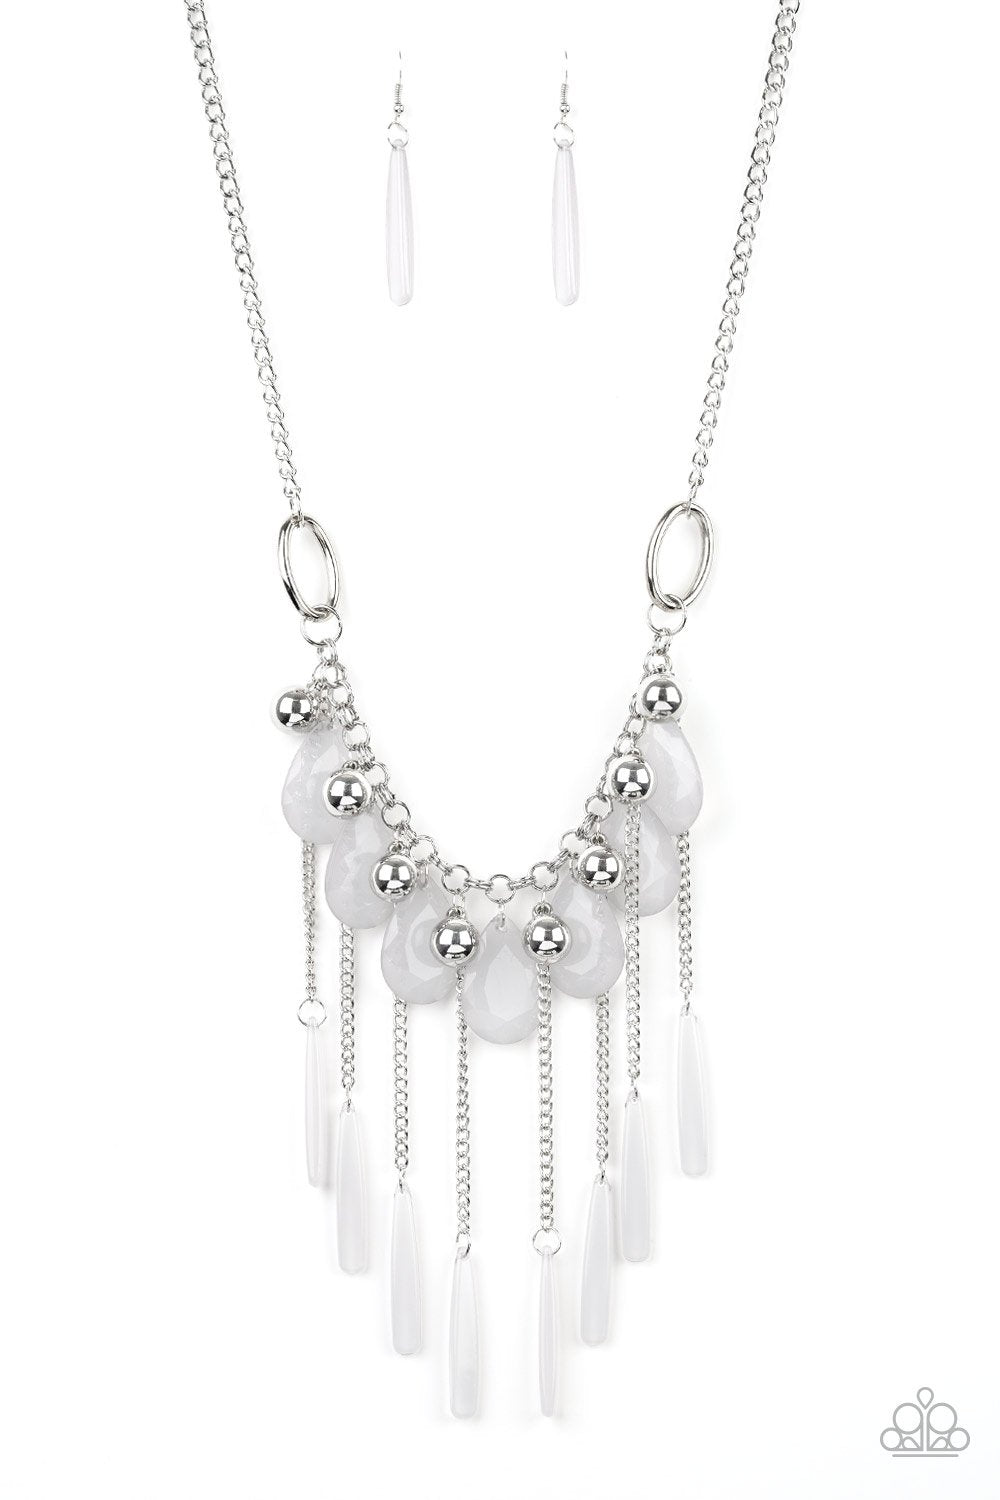 Roaring Riviera Silver Necklace - Paparazzi Accessories - lightbox -CarasShop.com - $5 Jewelry by Cara Jewels